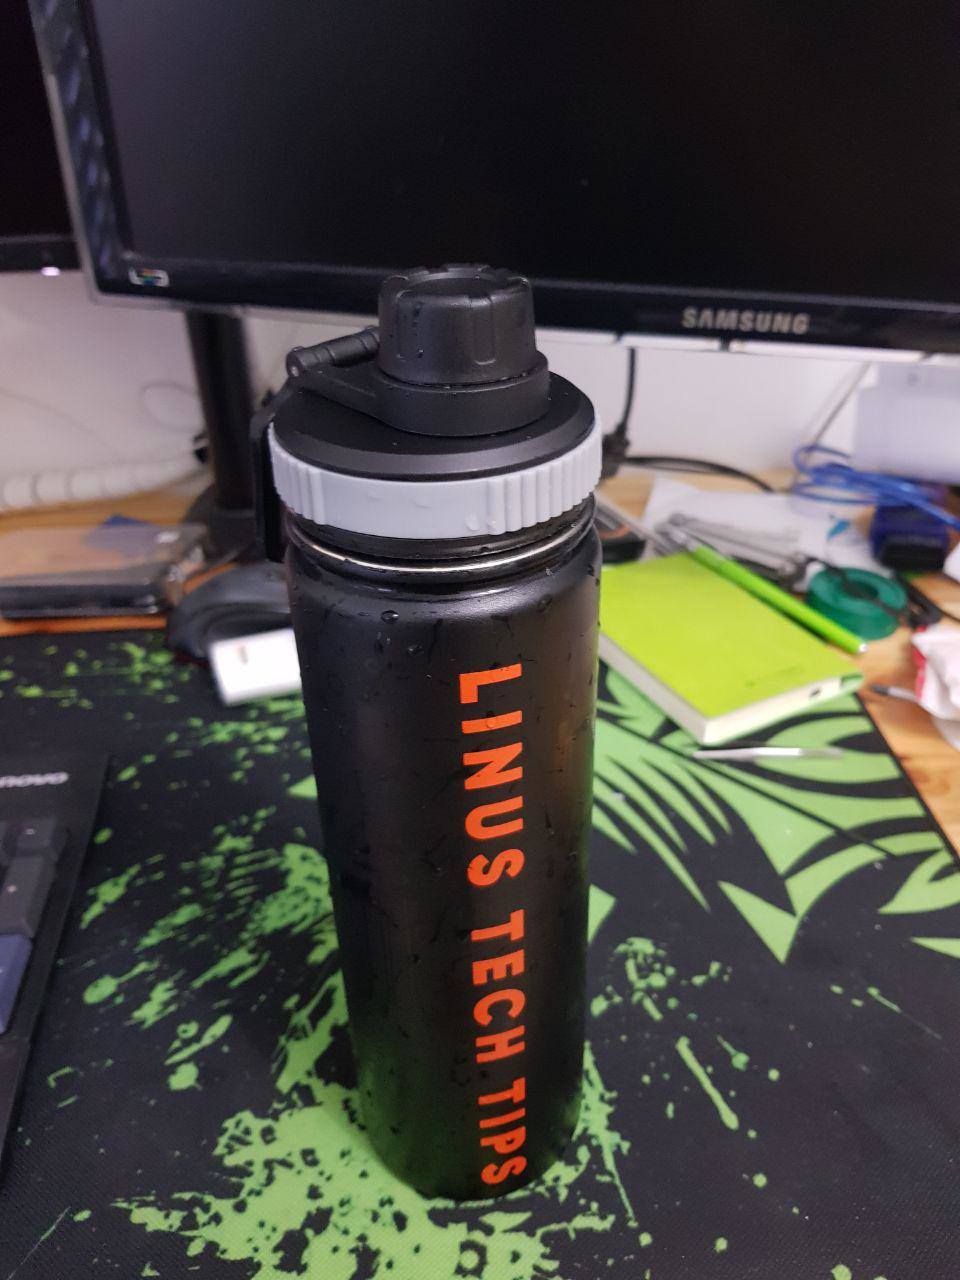 Anyone else's water bottle leak from the lid? : r/LinusTechTips